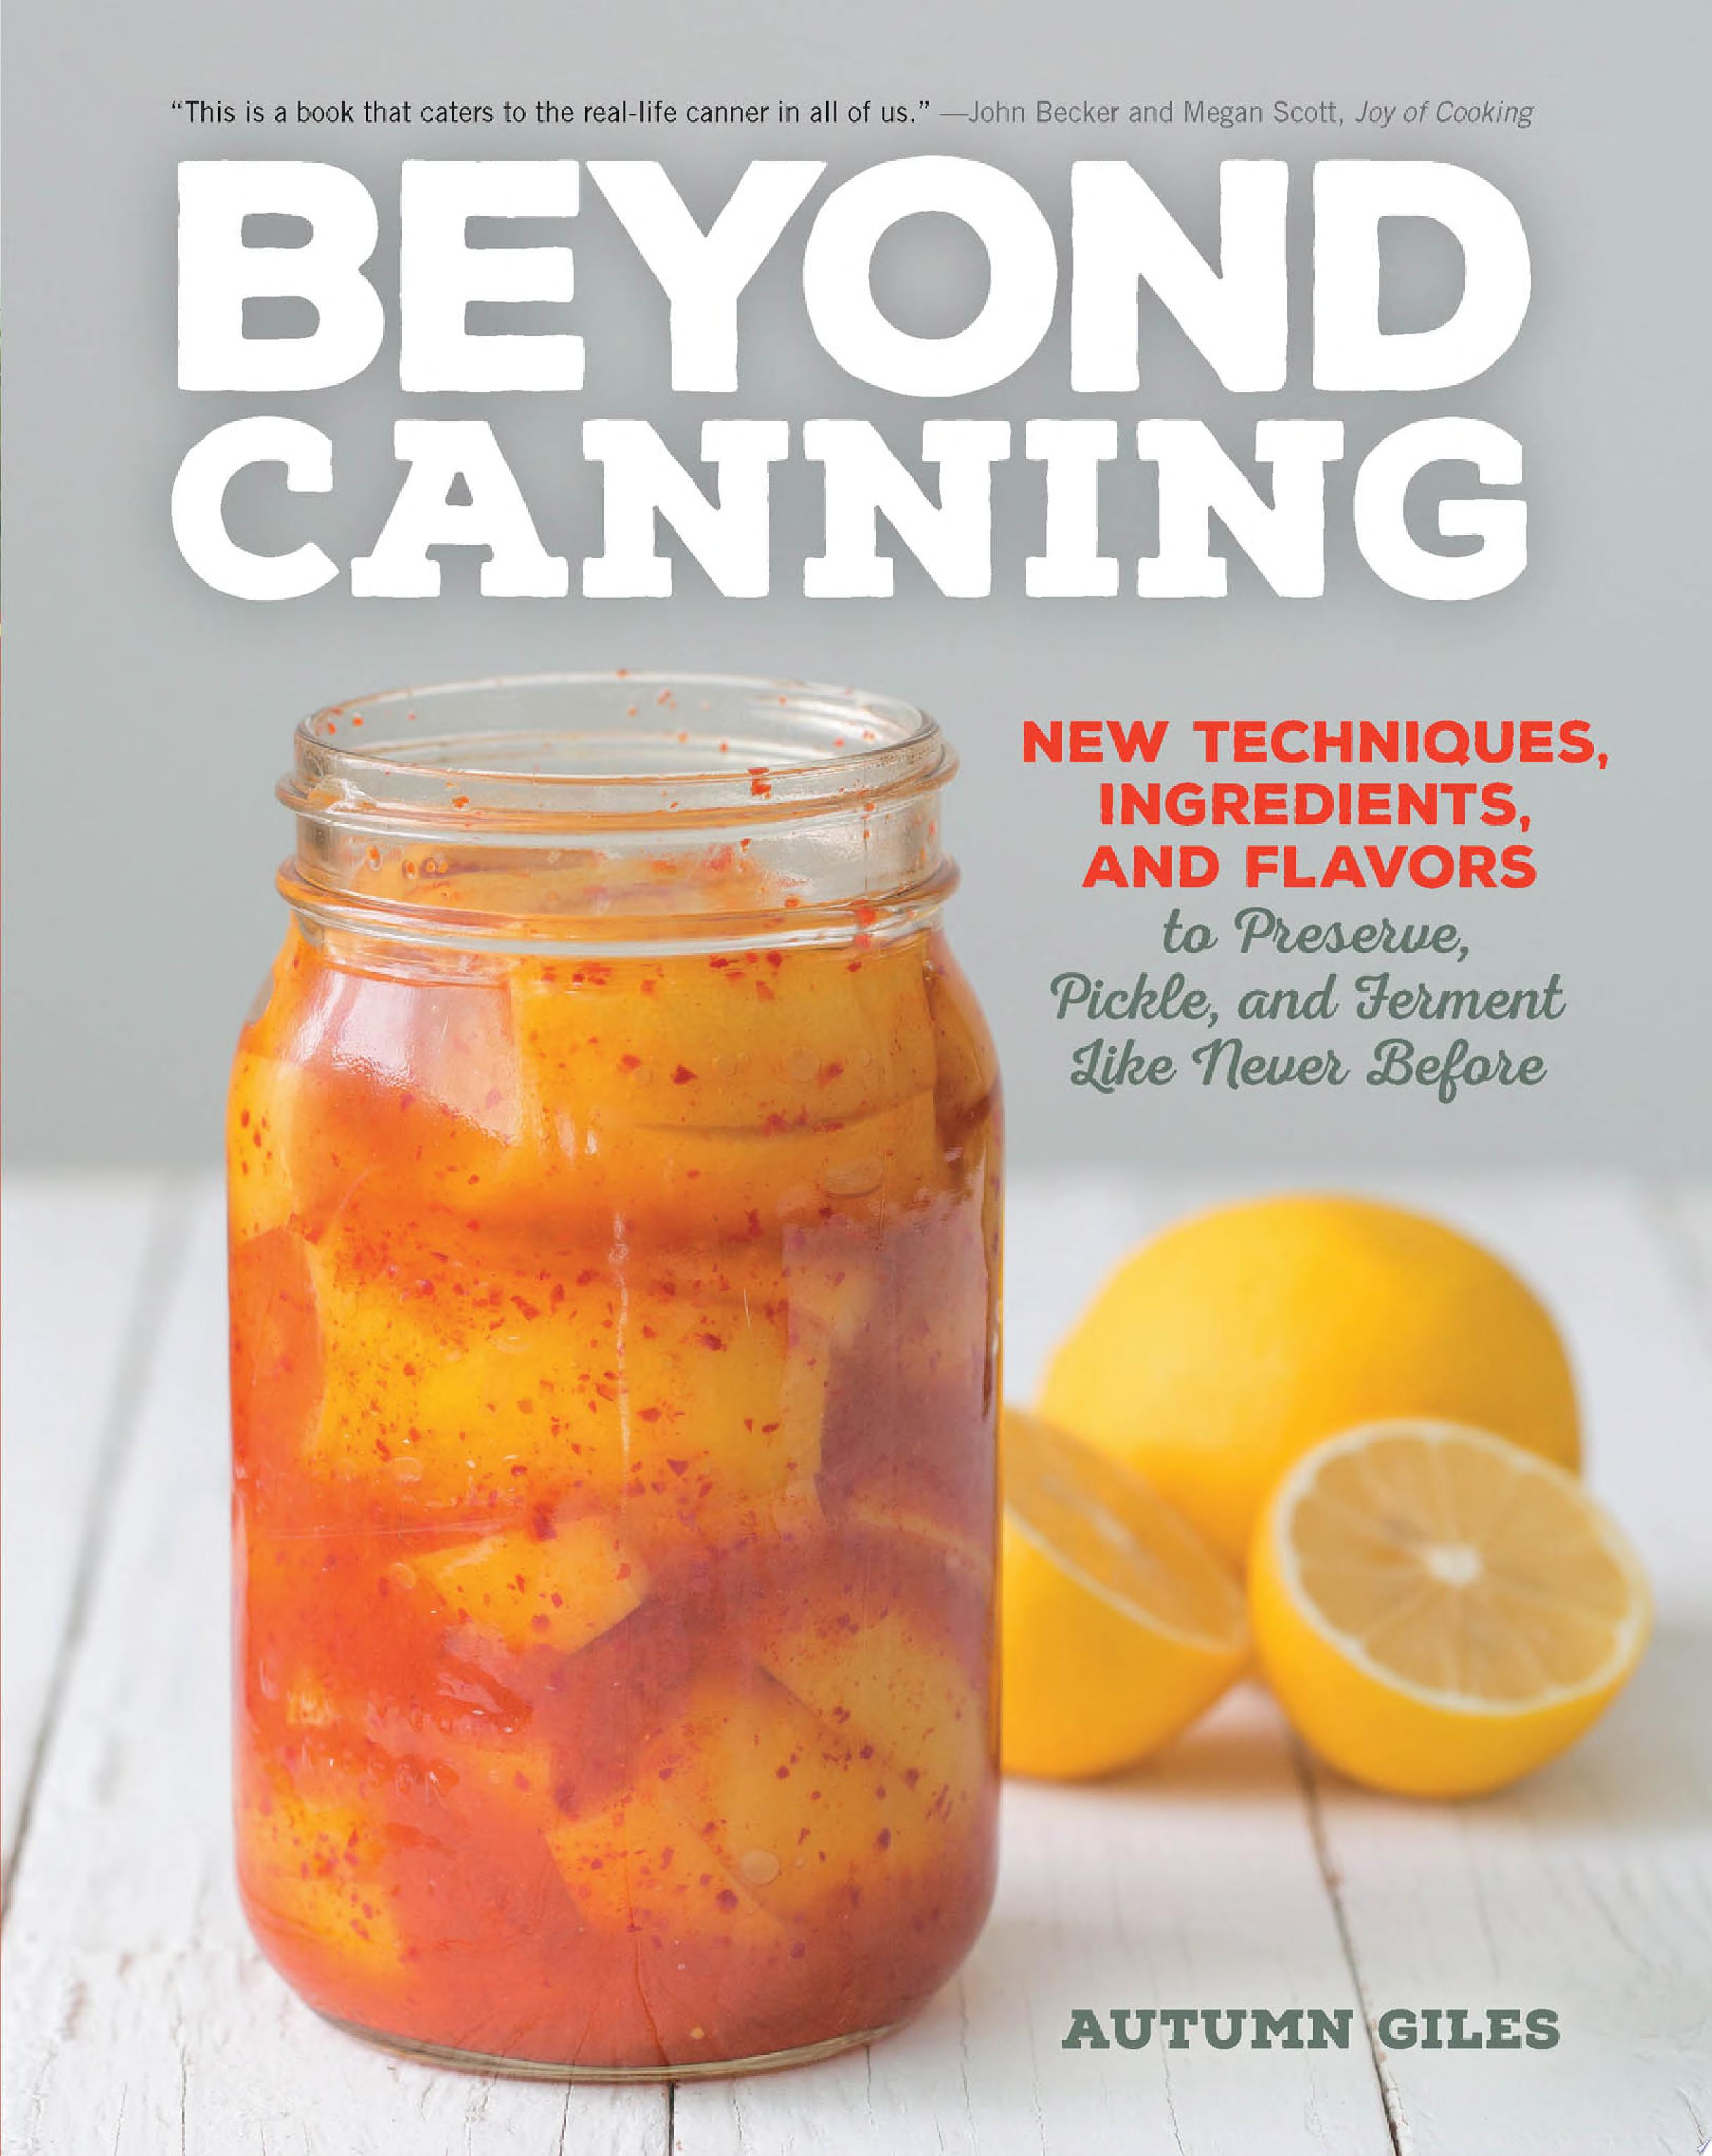 Image for "Beyond Canning"